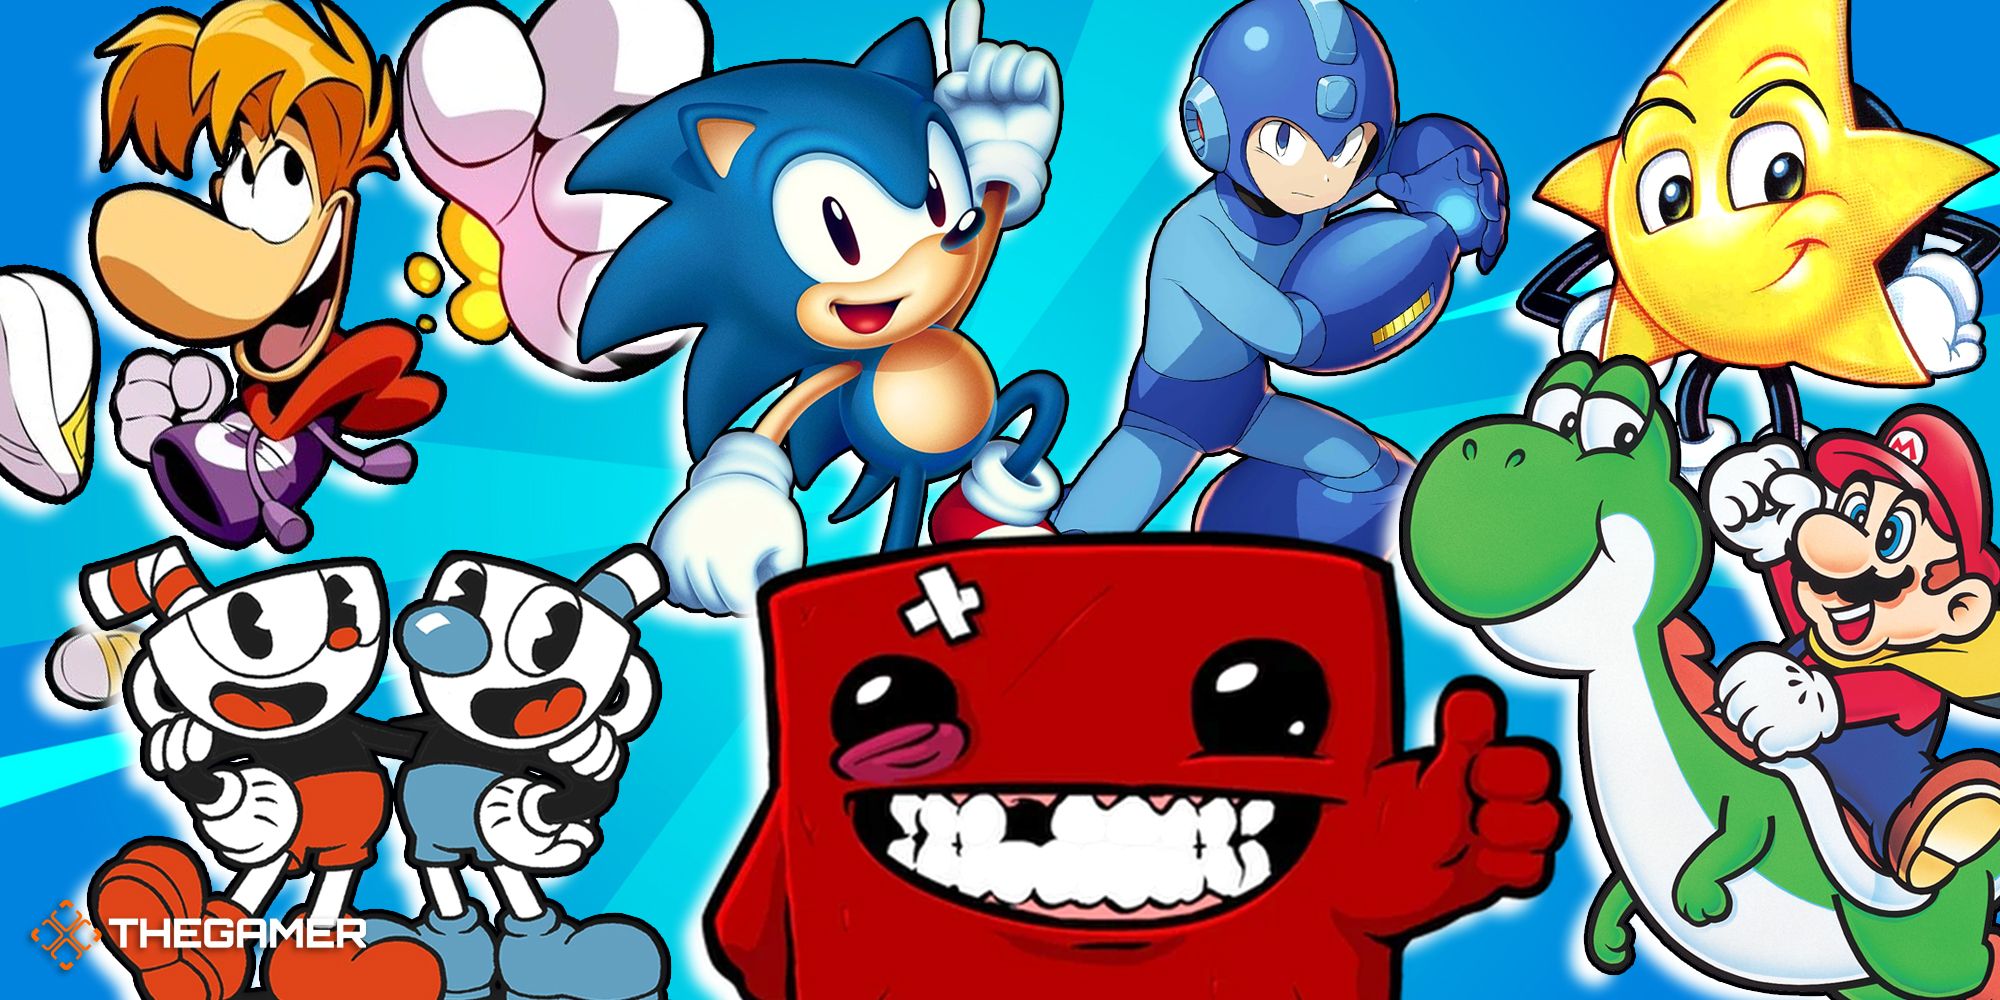 Game images from Super Meat Boy, Ristar, Cuphead , Sonic Mania, Rayman Legends Mega-Man X and Super Mario World.